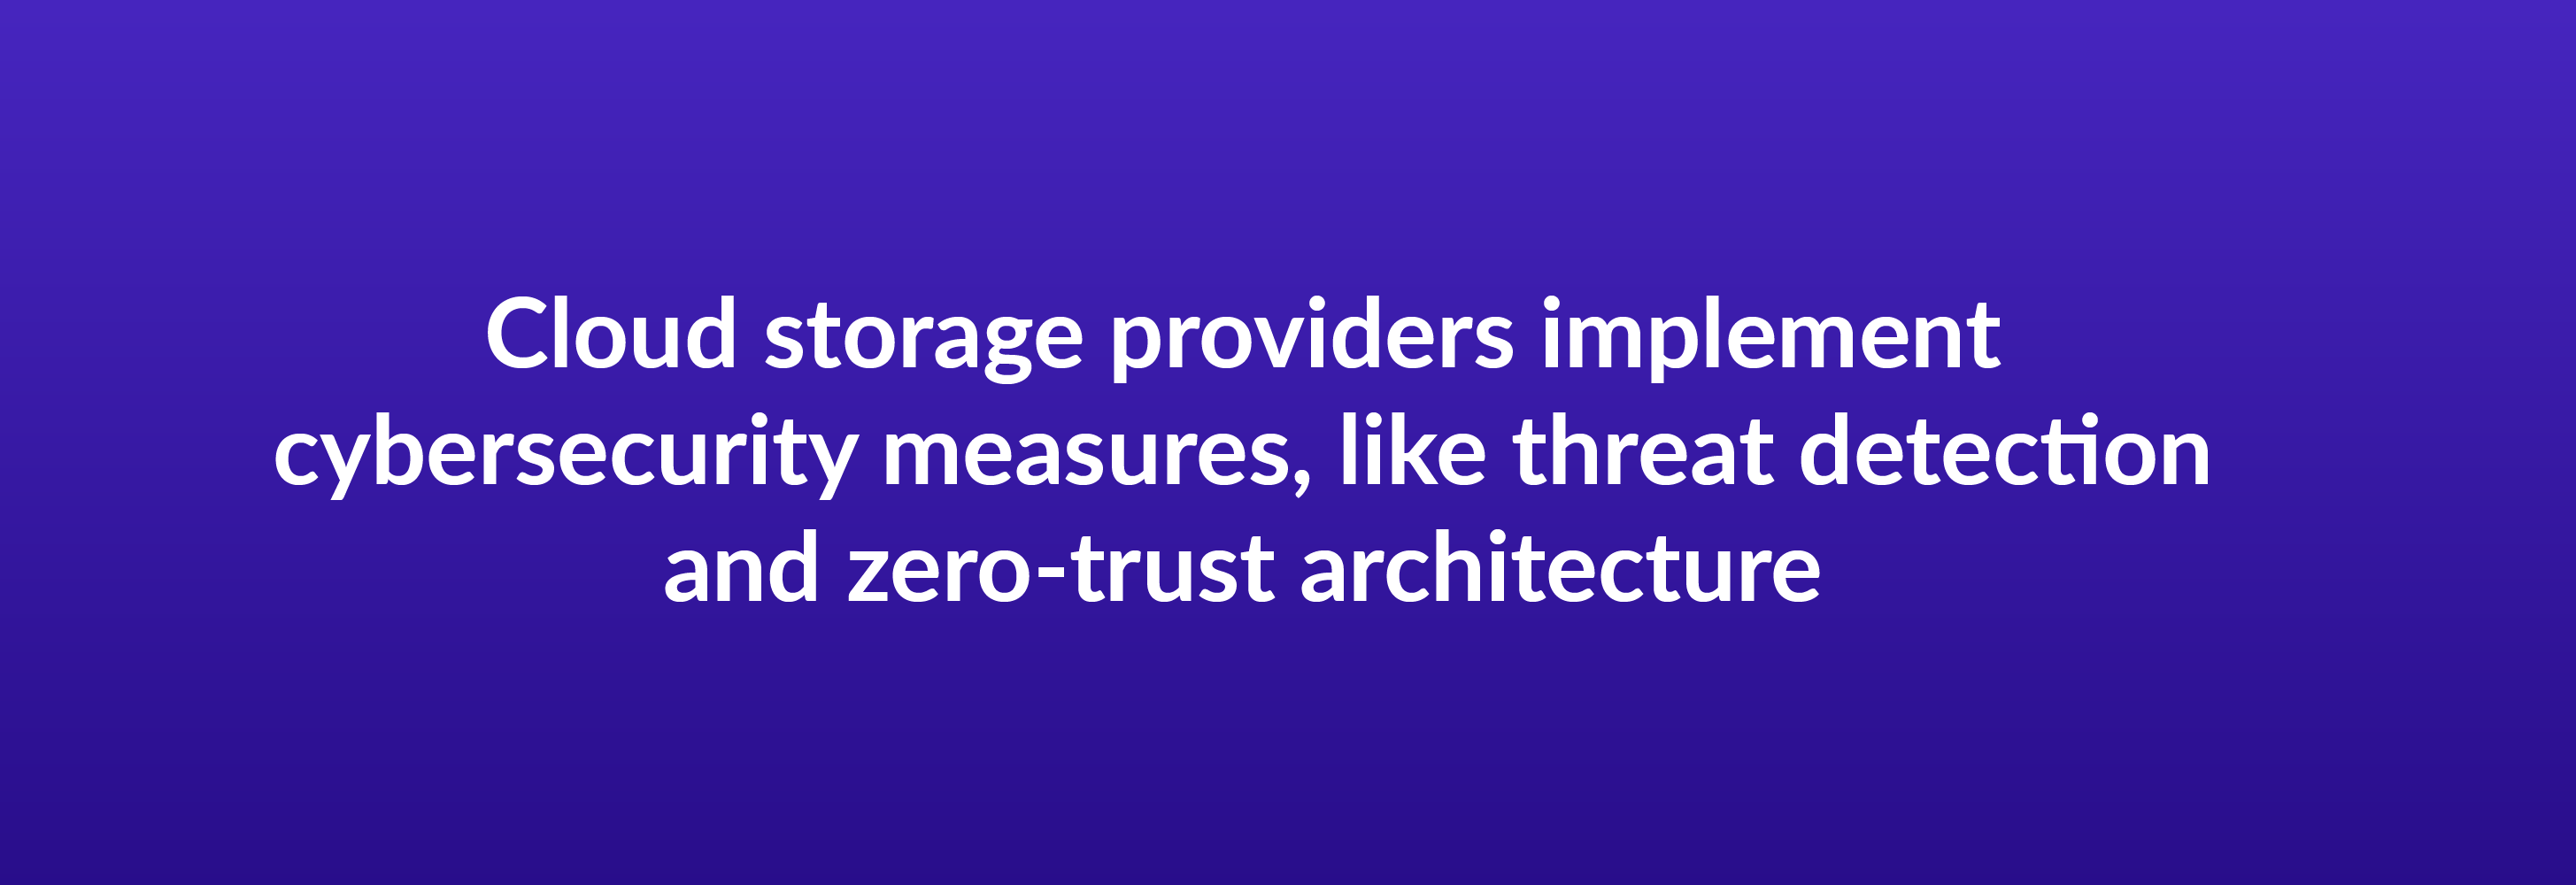 Cloud storage providers implement cybersecurity measures, like threat detection and zero-trust architecture